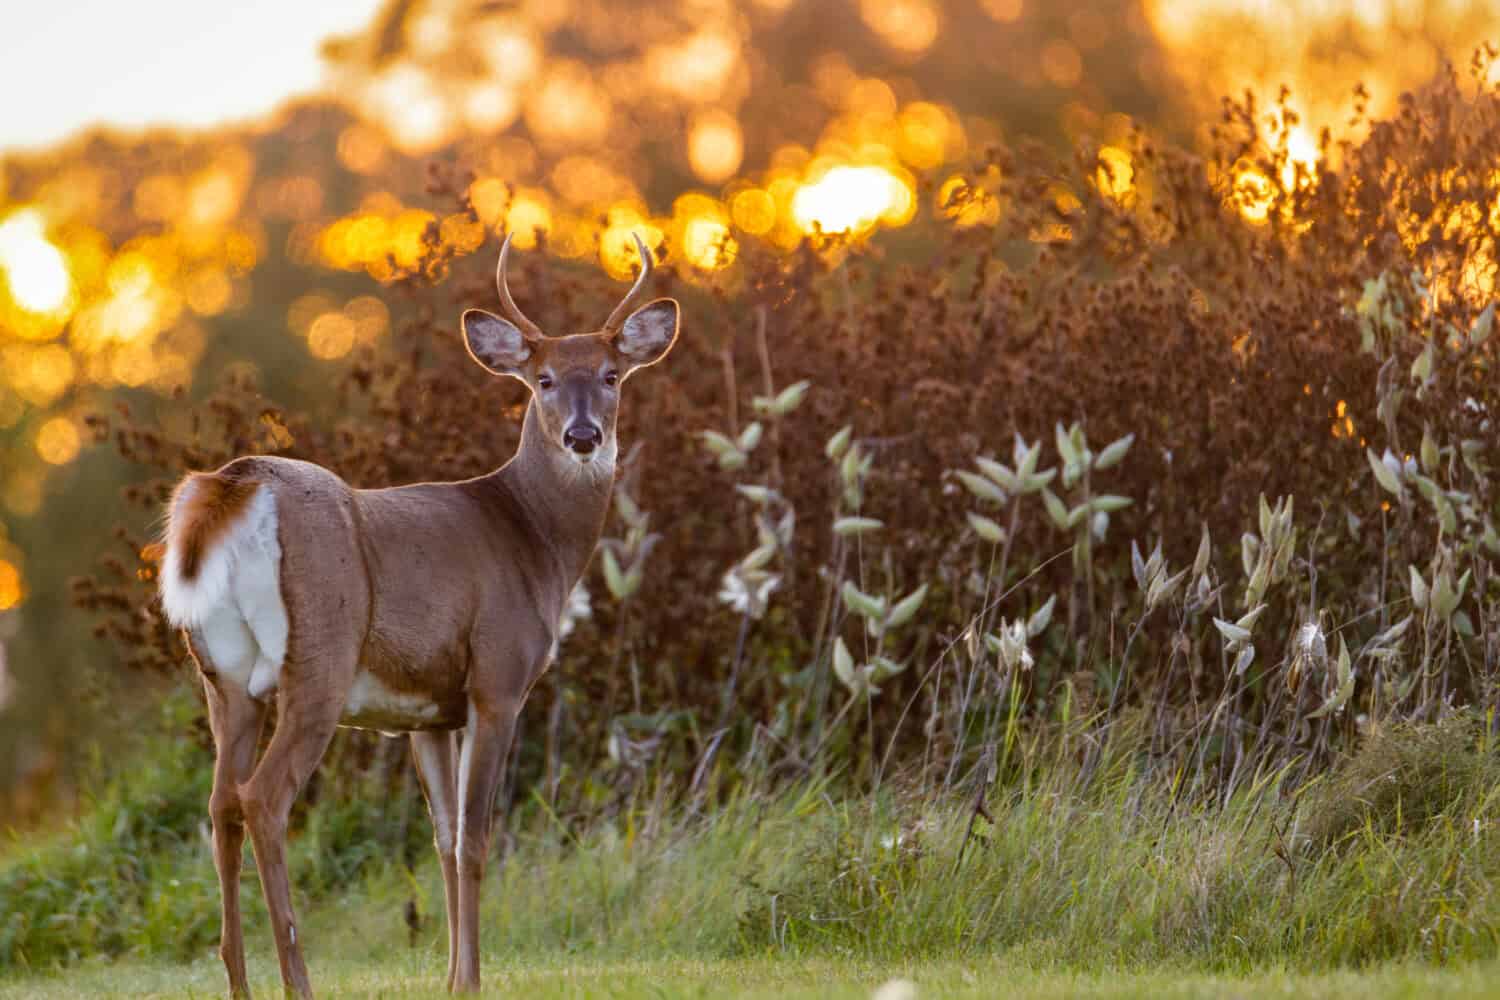 White-tailed Buck (Odocoileus virginianus) backlit from the setting sun at evening. Selective focus, background blur and foreground blur.